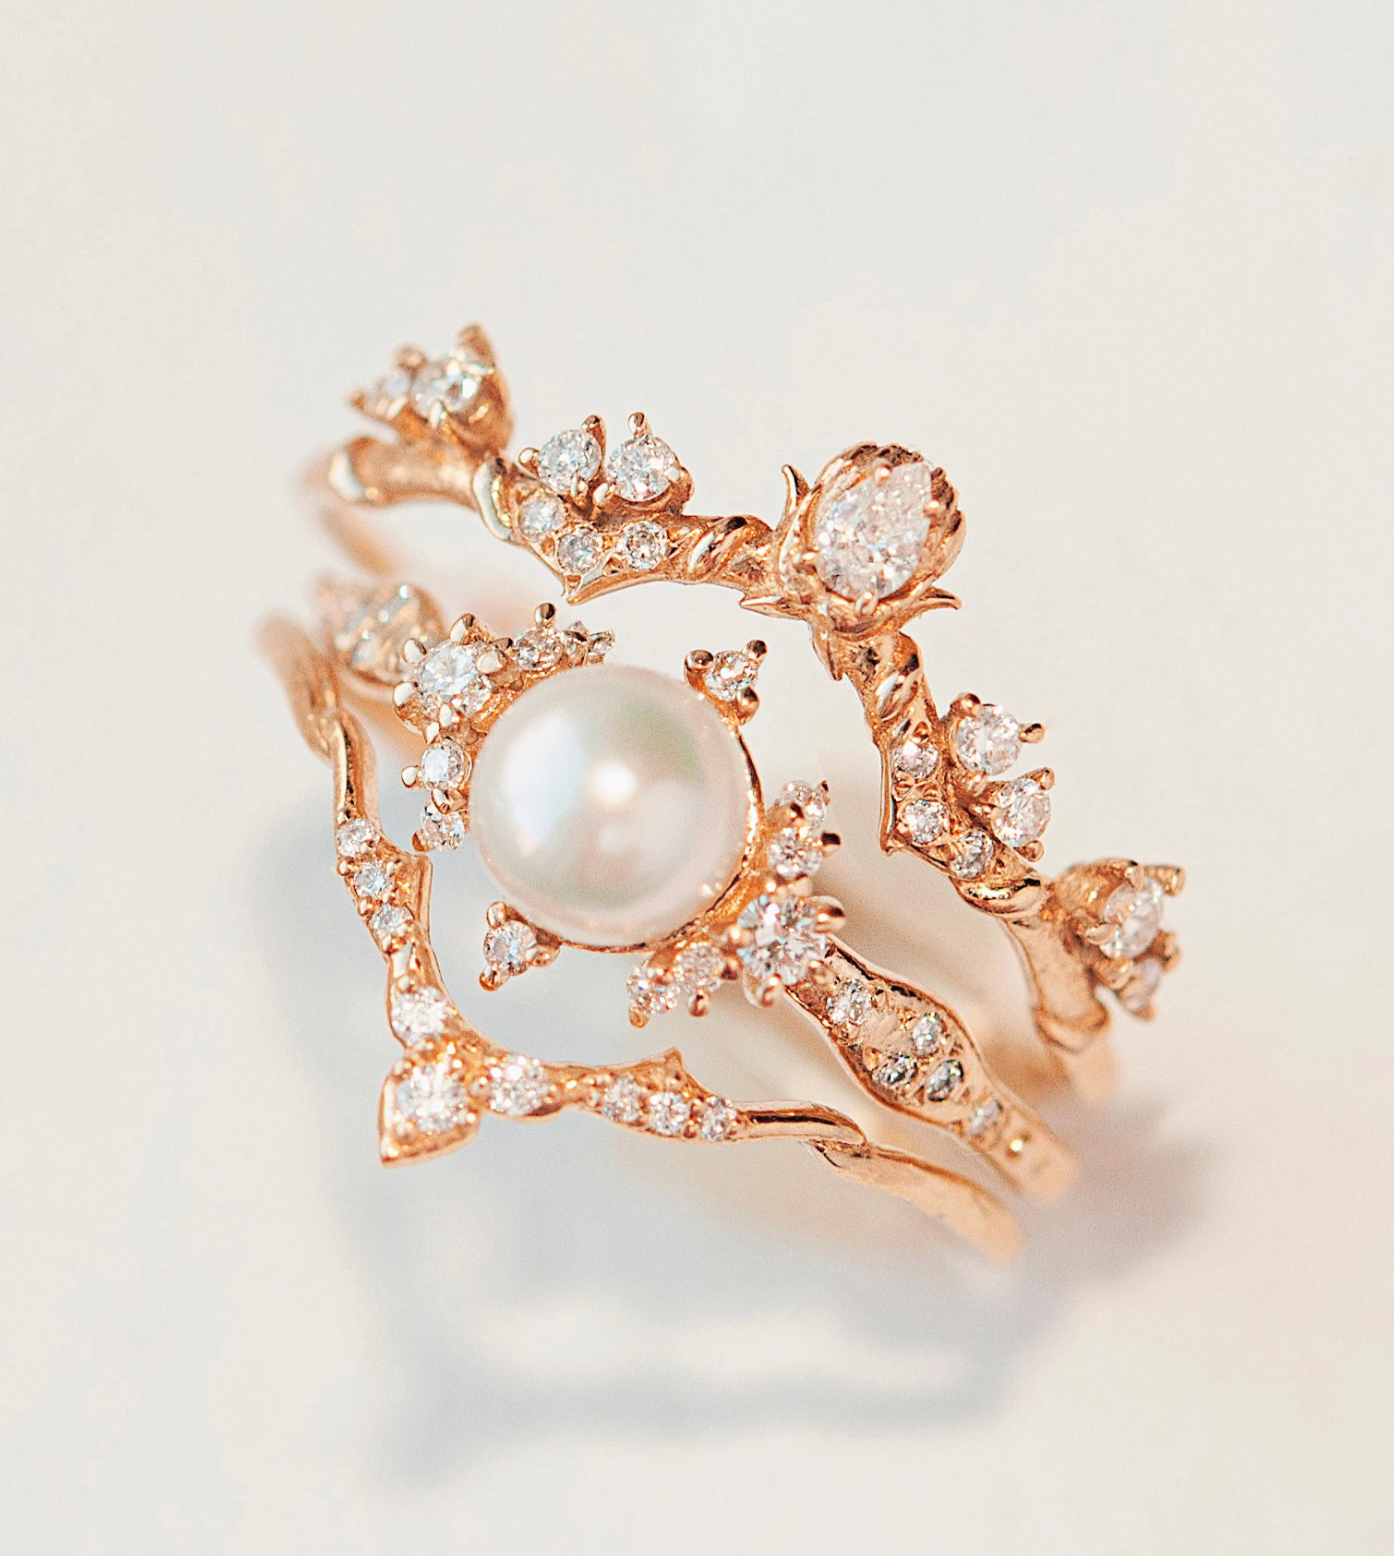 Pearl Birth of Venus Ring stacked with two diamond bands on white background.